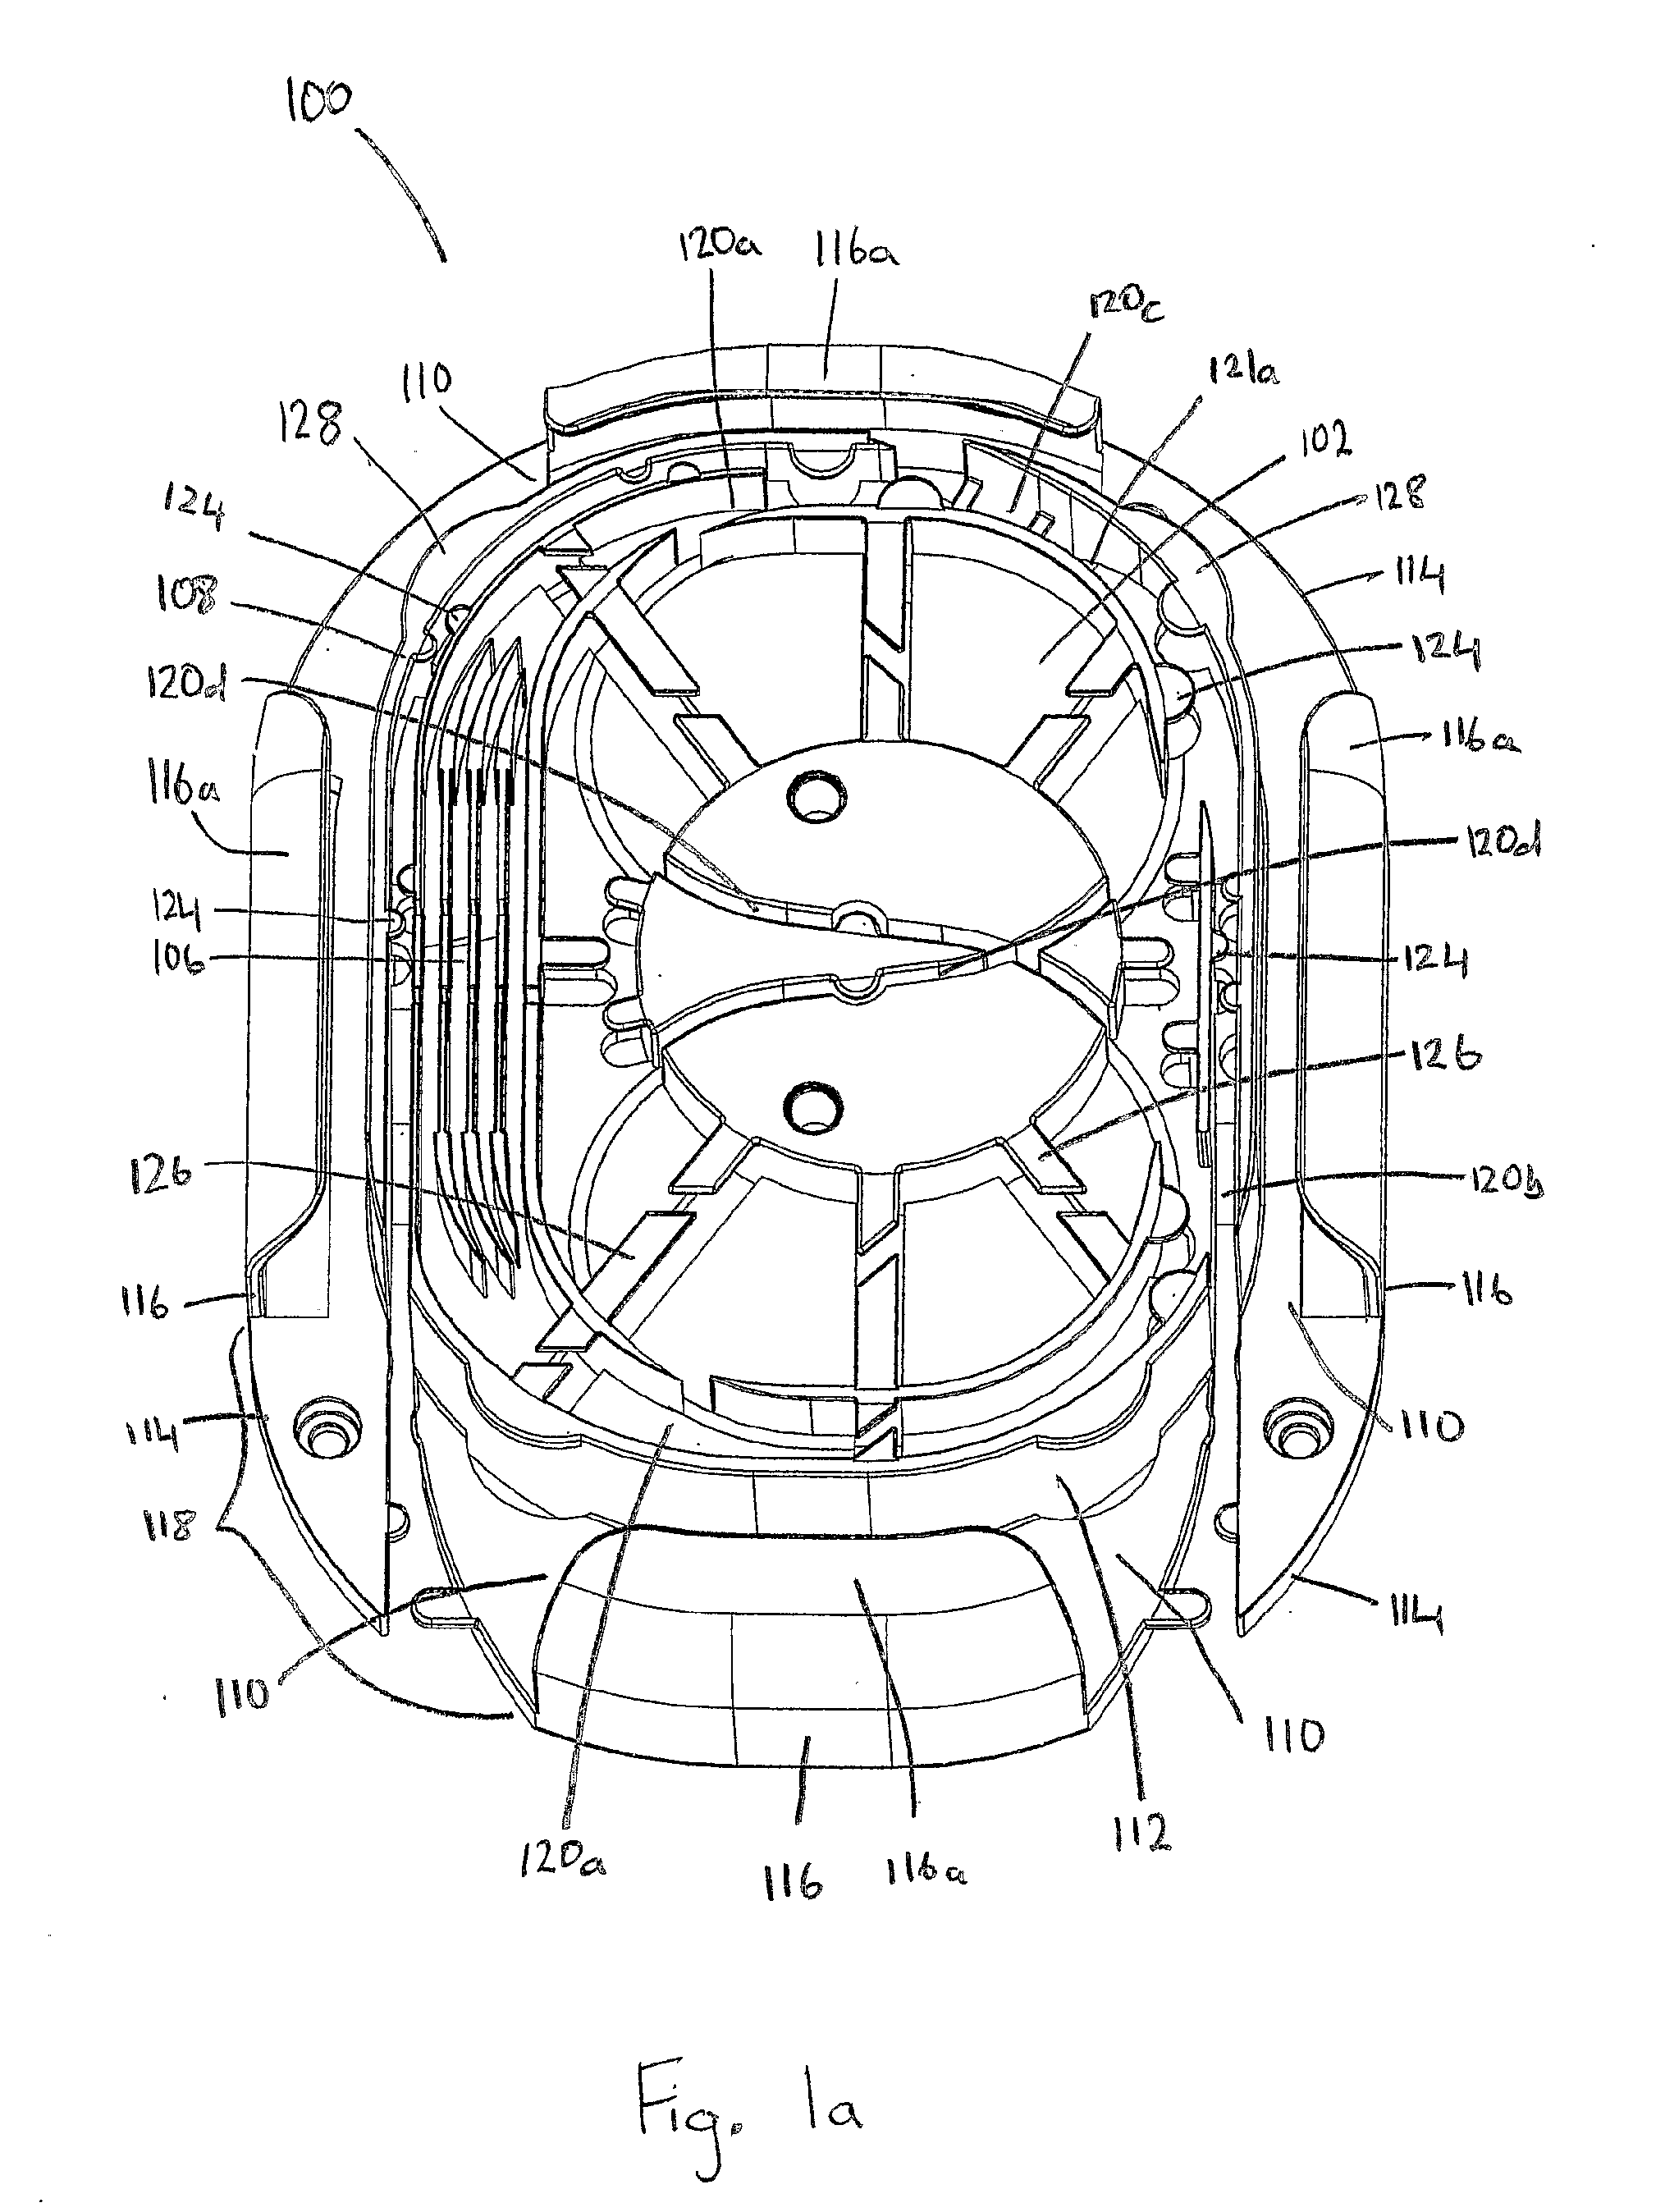 Cable loop device for optical systems